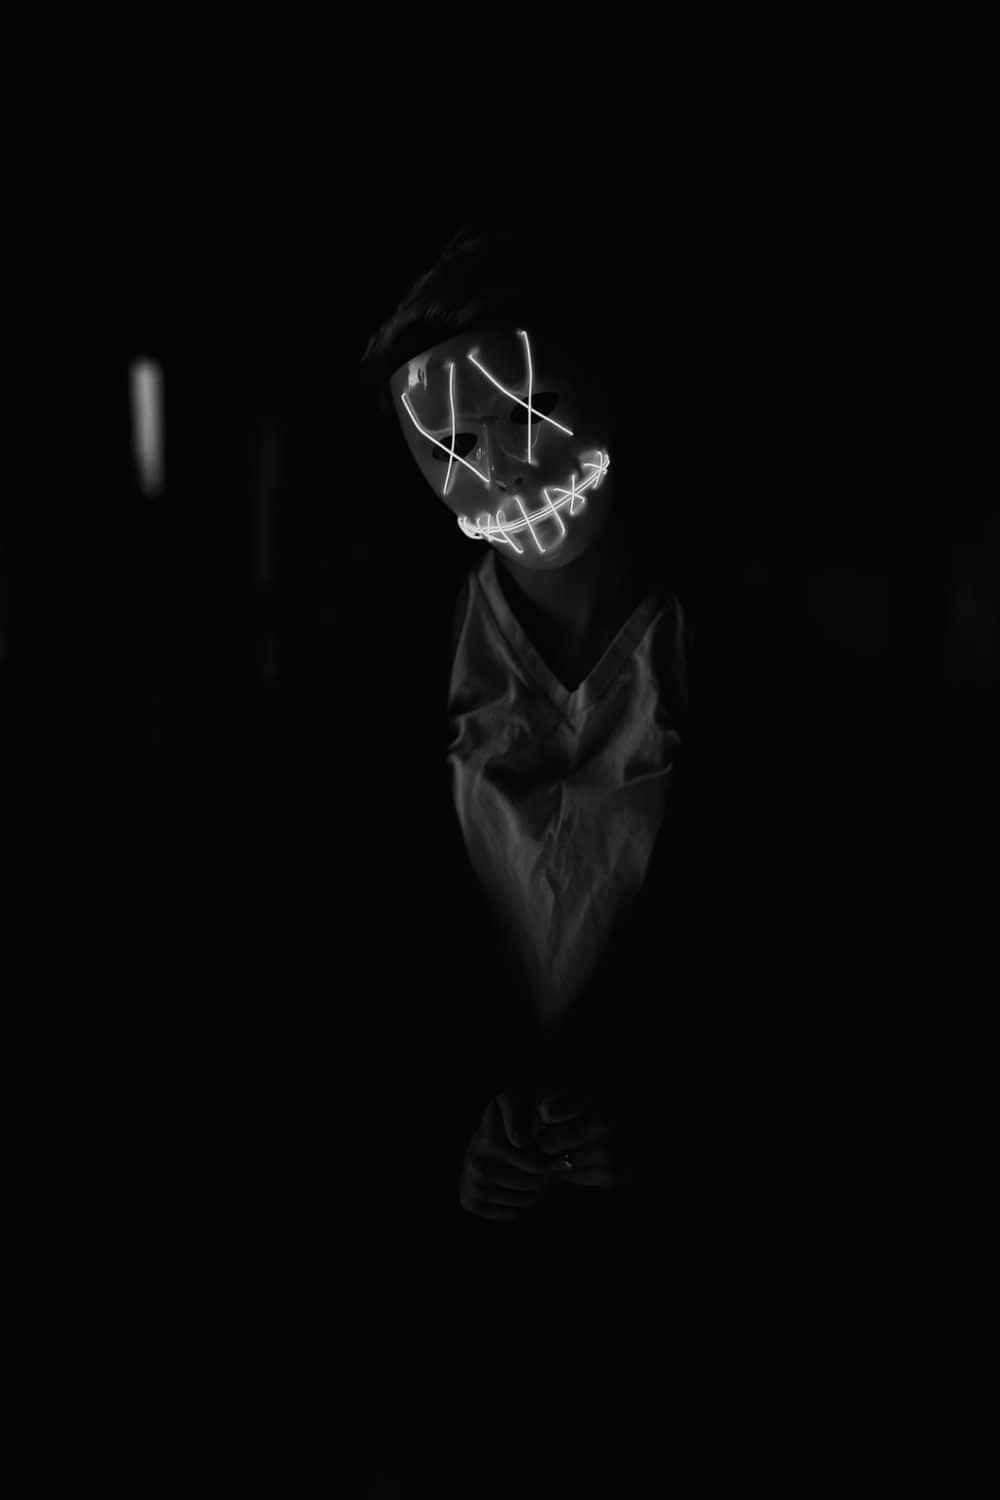 A Black And White Photo Of A Person In A Mask Wallpaper